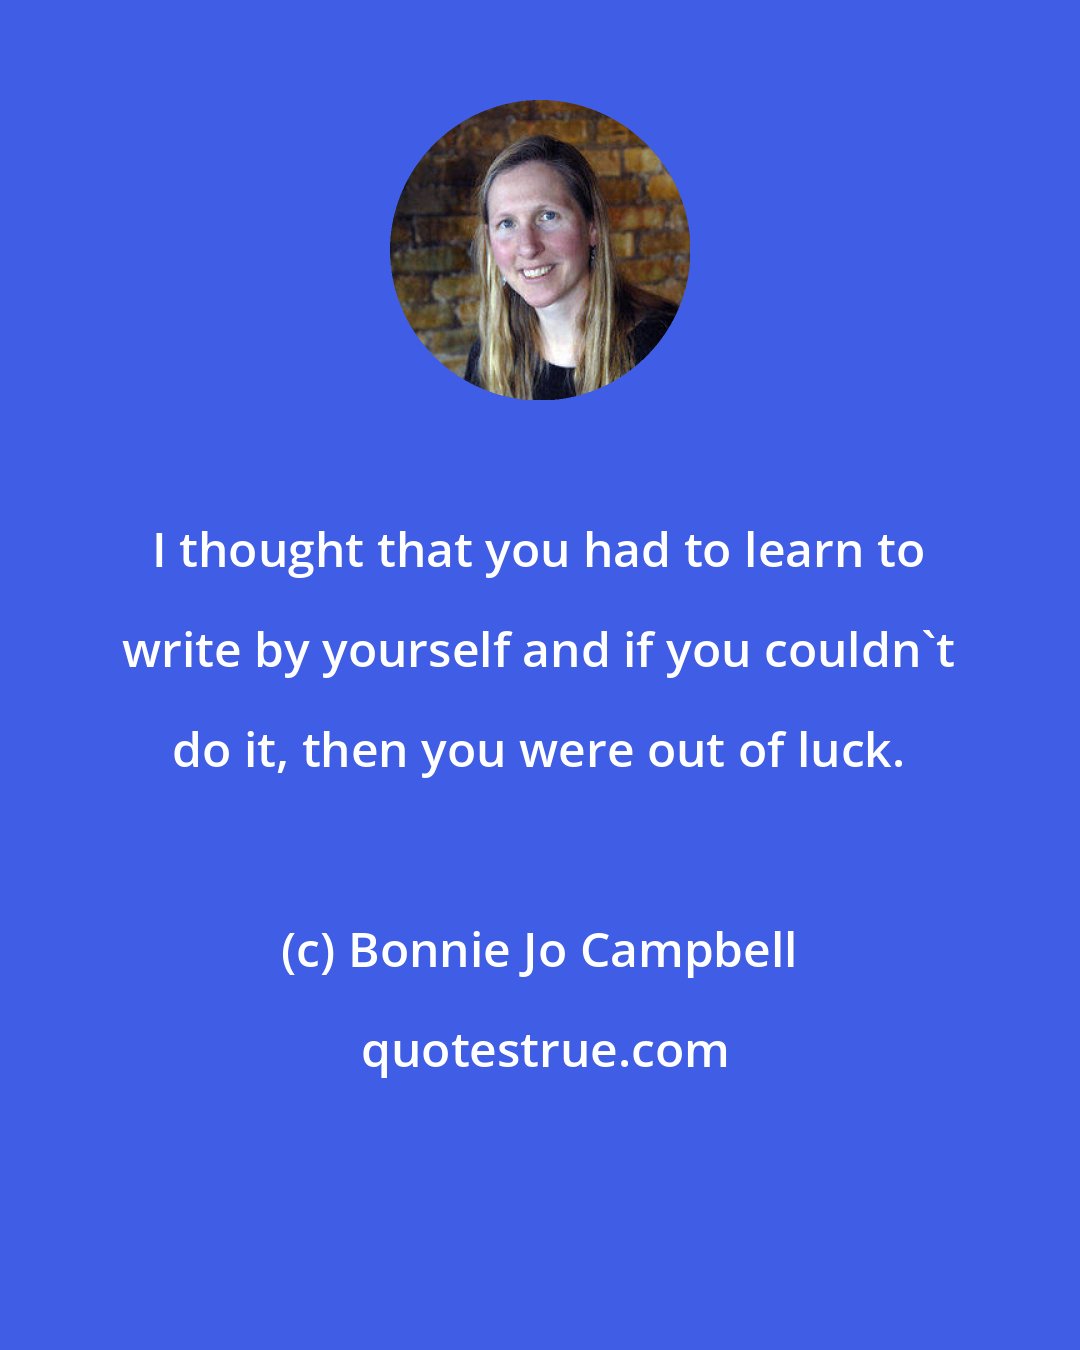 Bonnie Jo Campbell: I thought that you had to learn to write by yourself and if you couldn't do it, then you were out of luck.